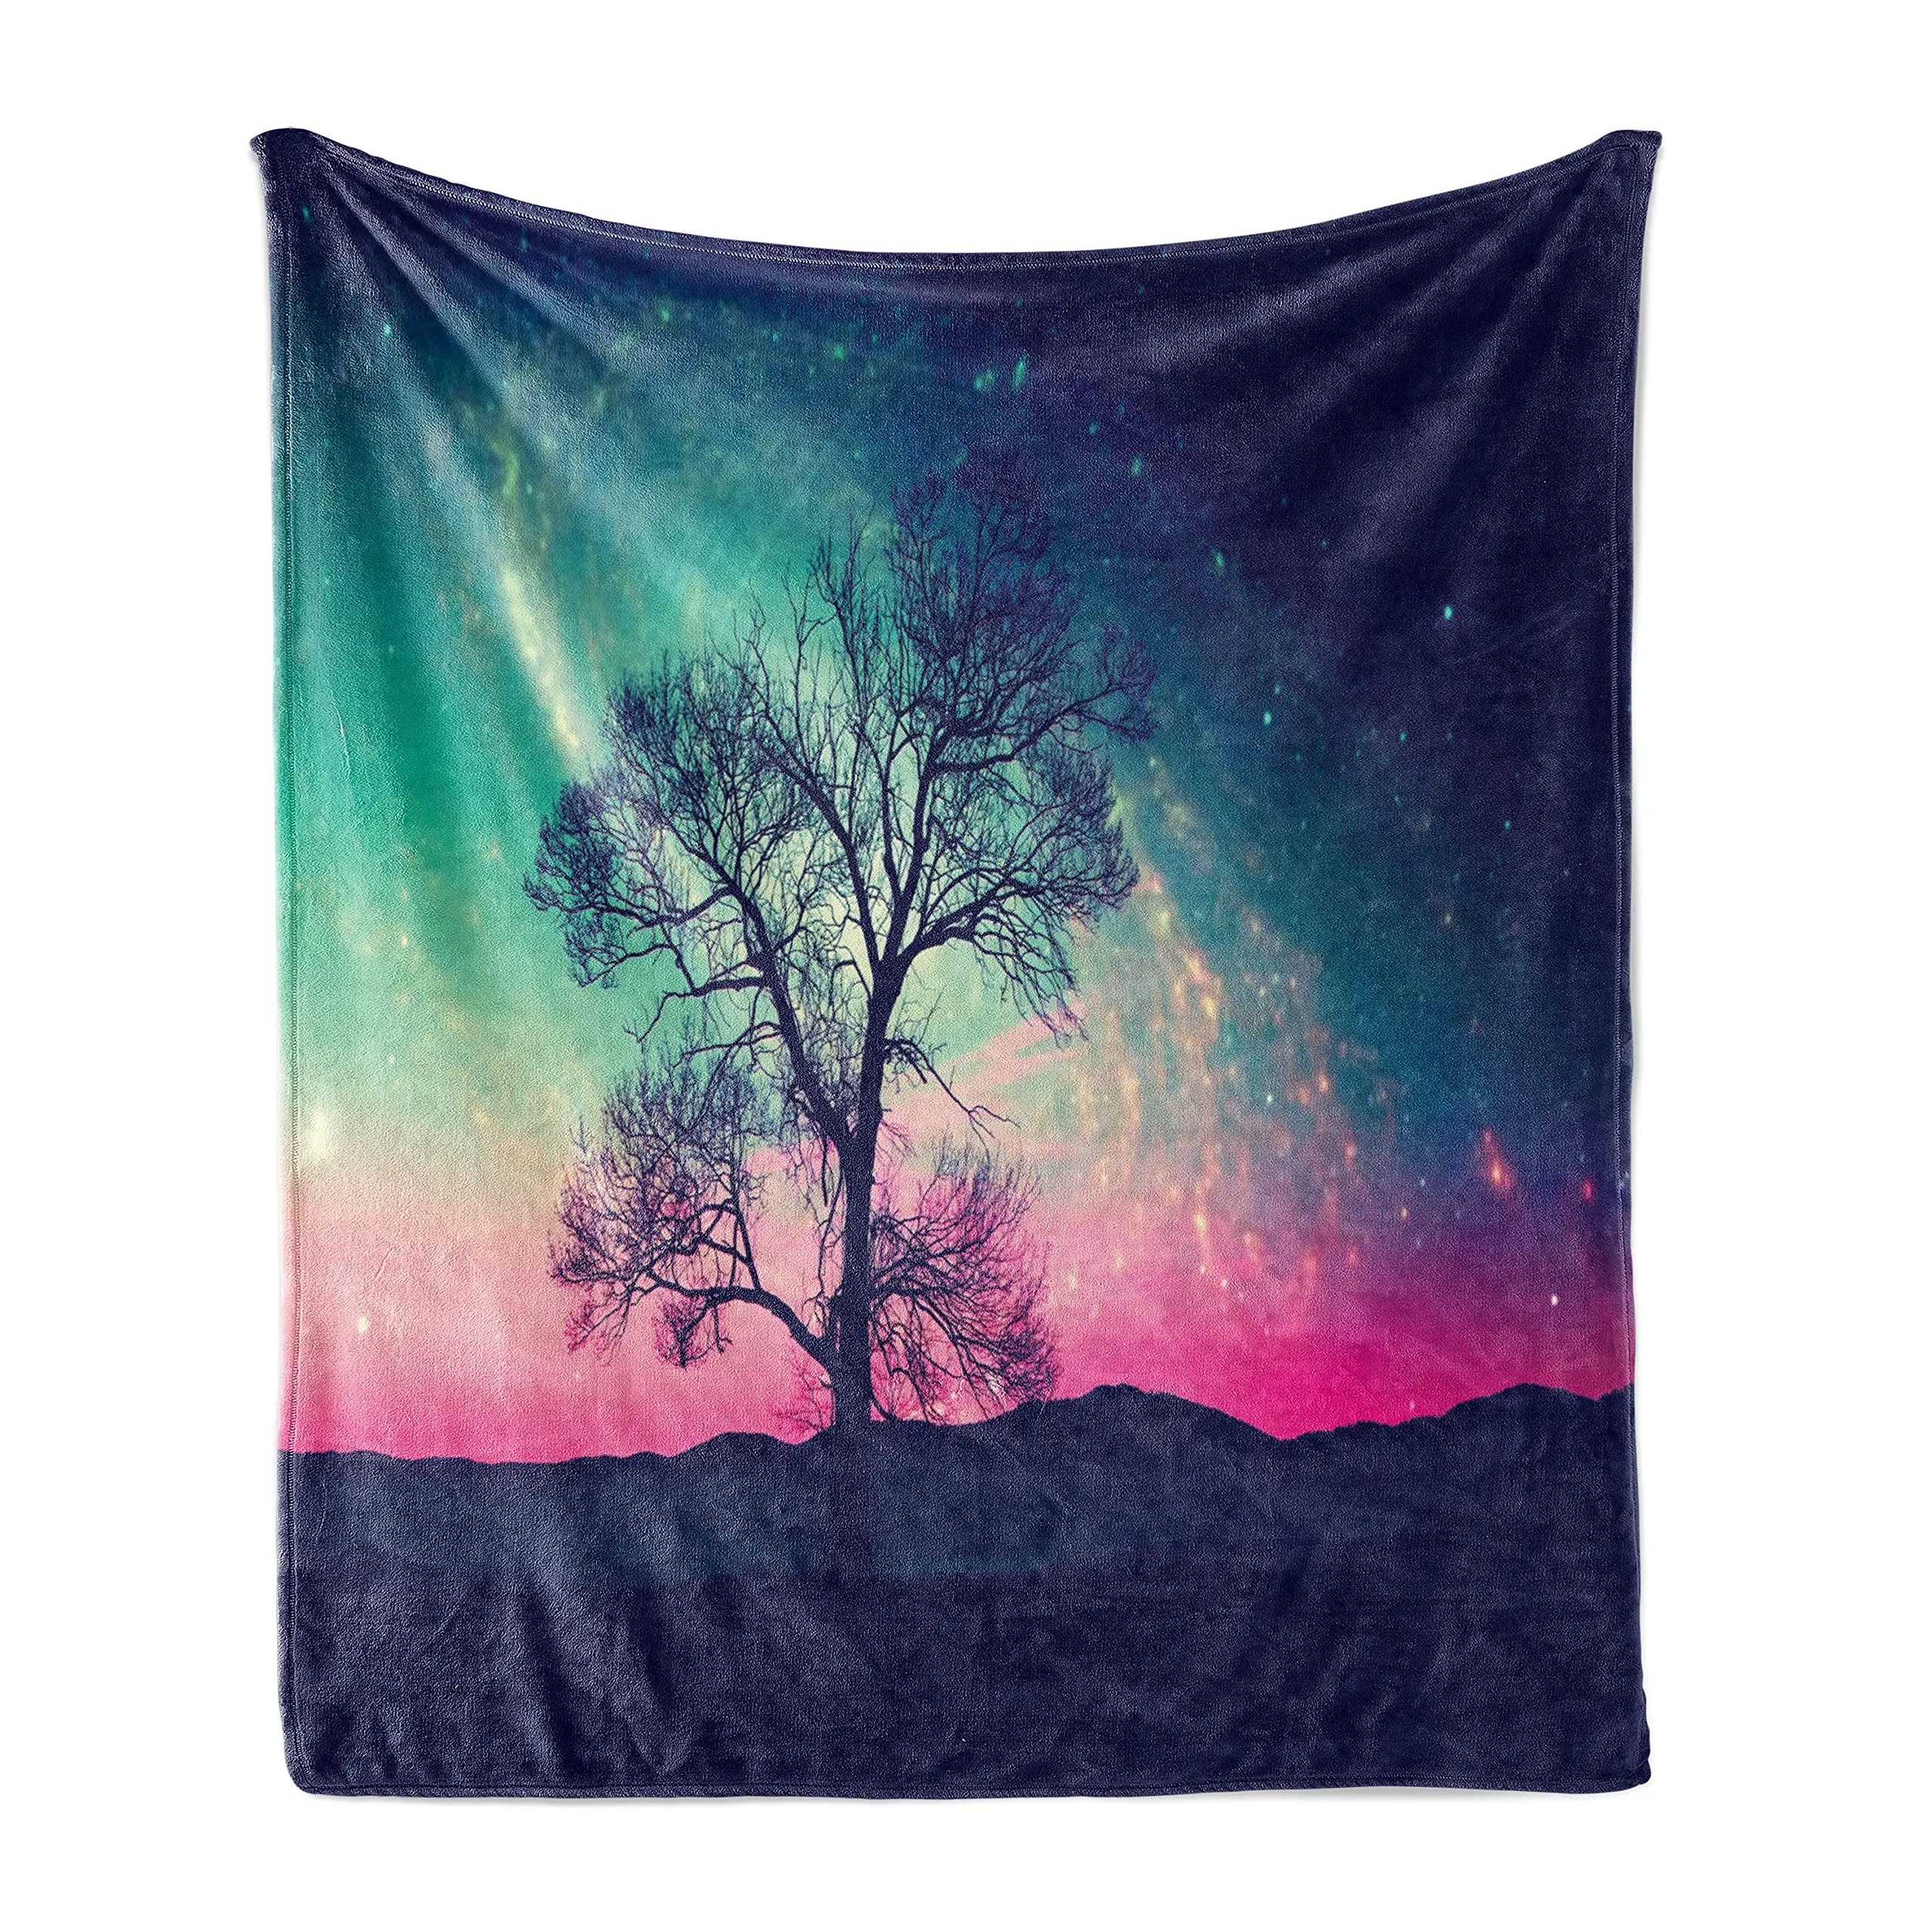 

Galaxy Throw Blanket,Vibrant Stars Space Cosmic Lonely Tree Aurora Borealis Flannel Fleece Blanket for Soft Couch Adults Gifts